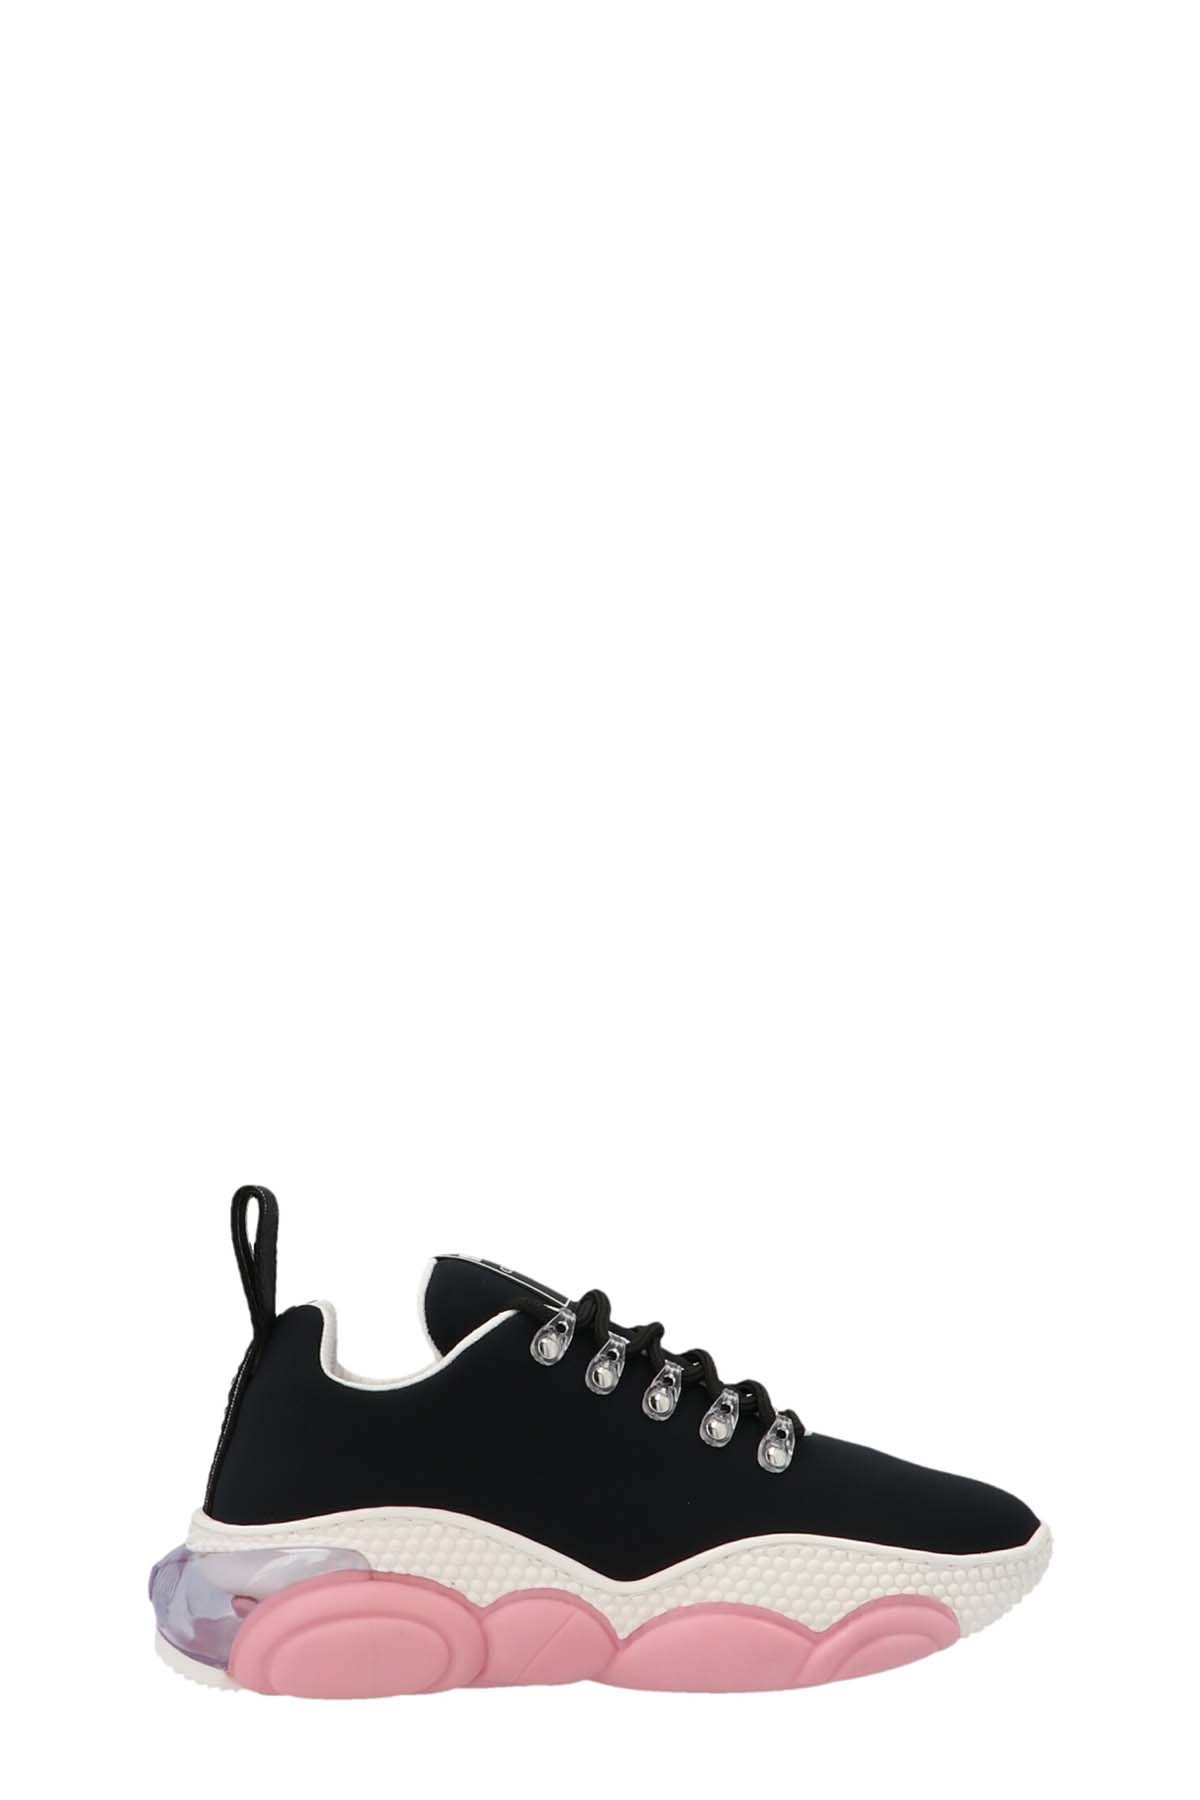 MOSCHINO ‘Teddy' Sneakers